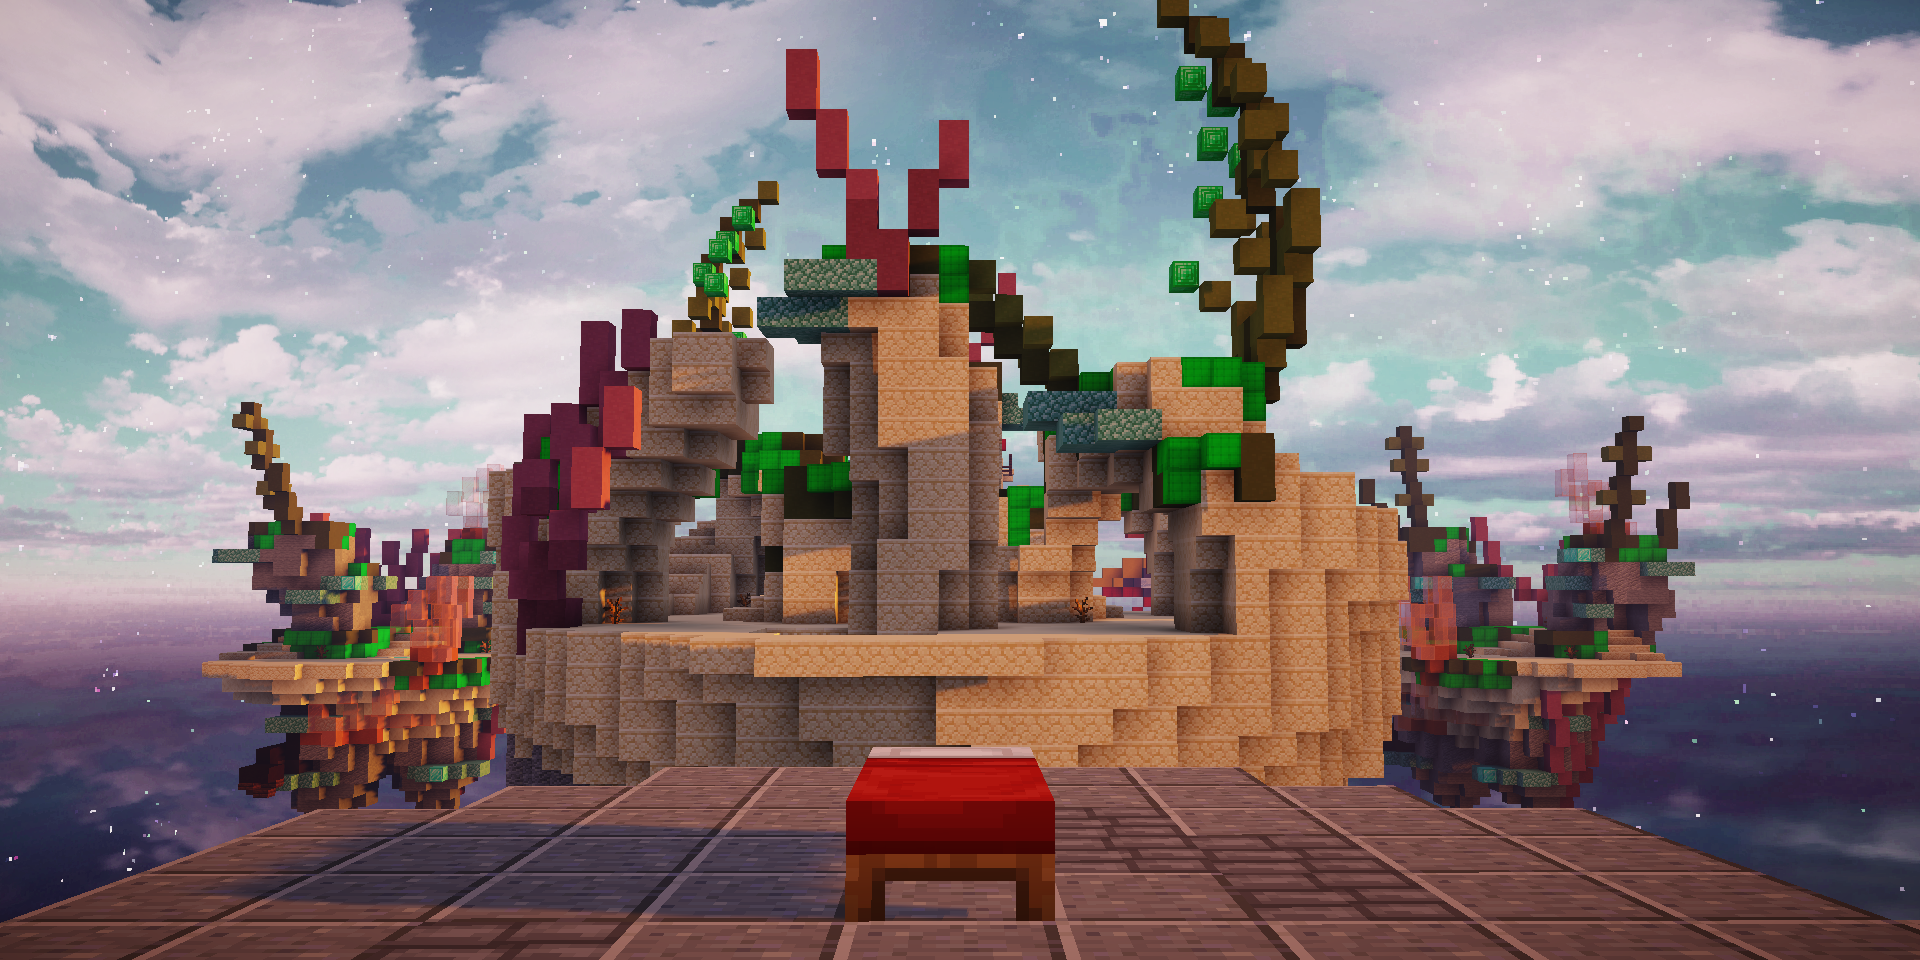 A BedWars starting point on the Hypixel Minecraft server.